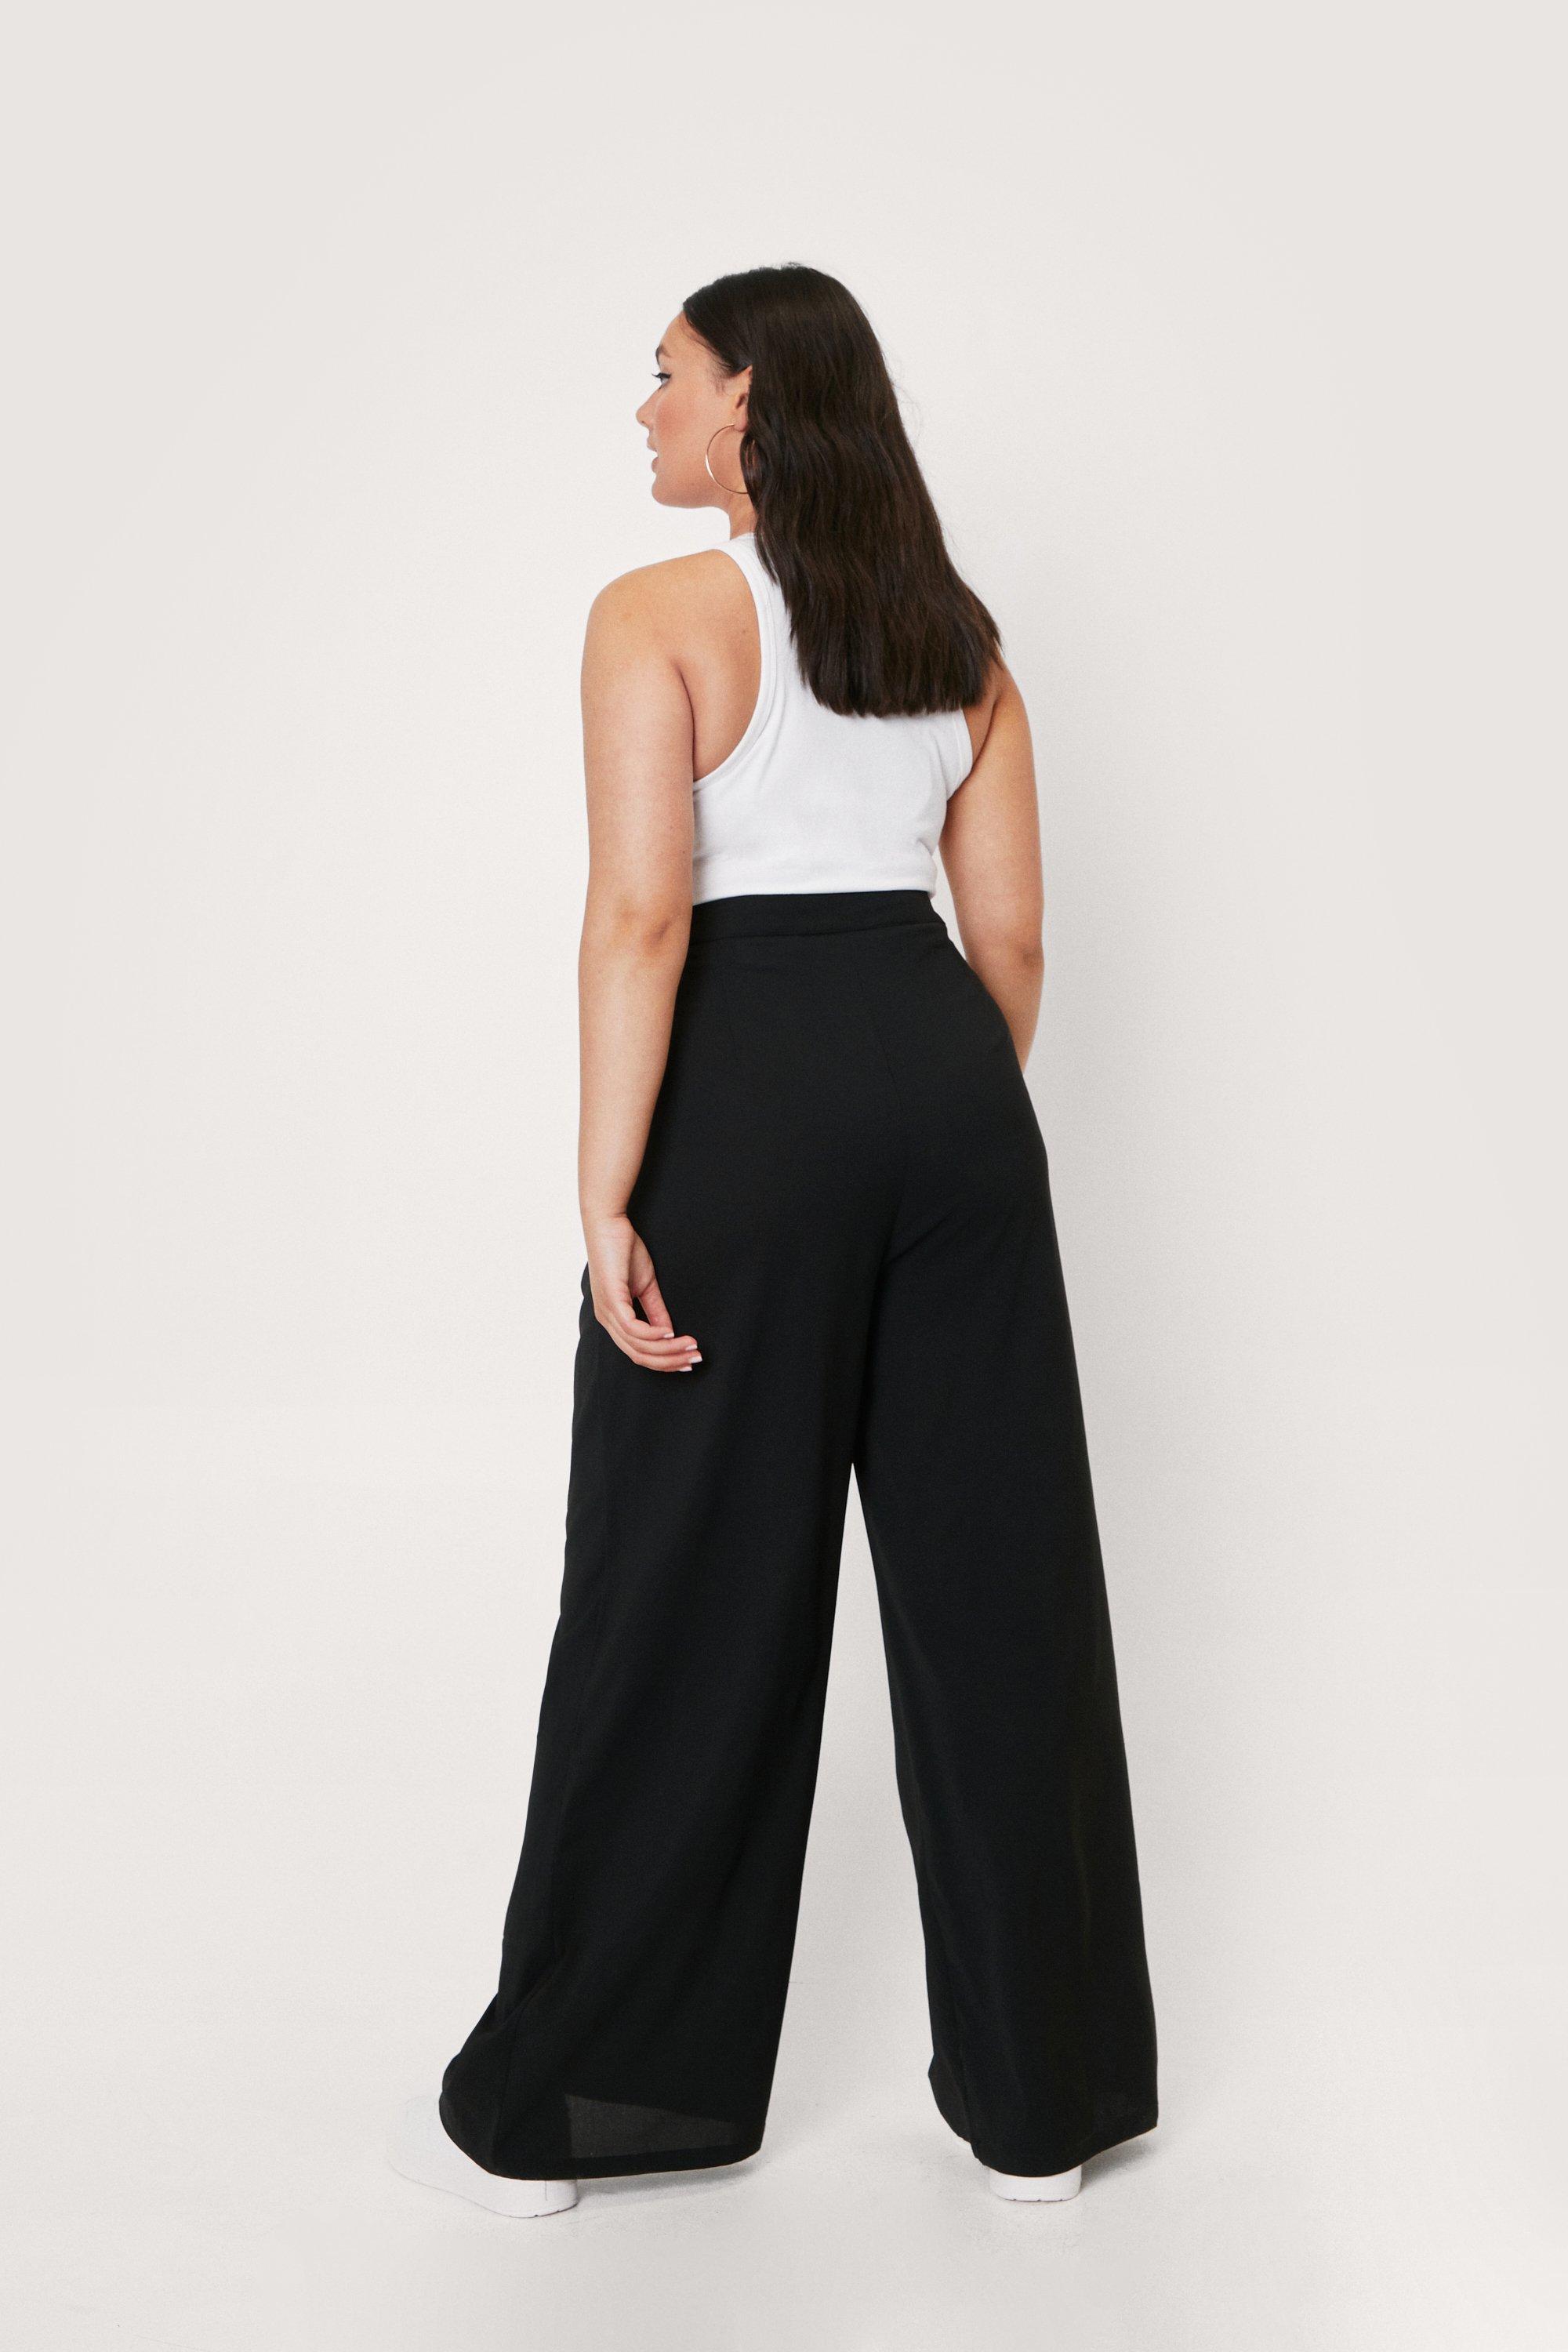 Chiclily Belted Wide Leg Pants For Women High Waisted, 60% OFF